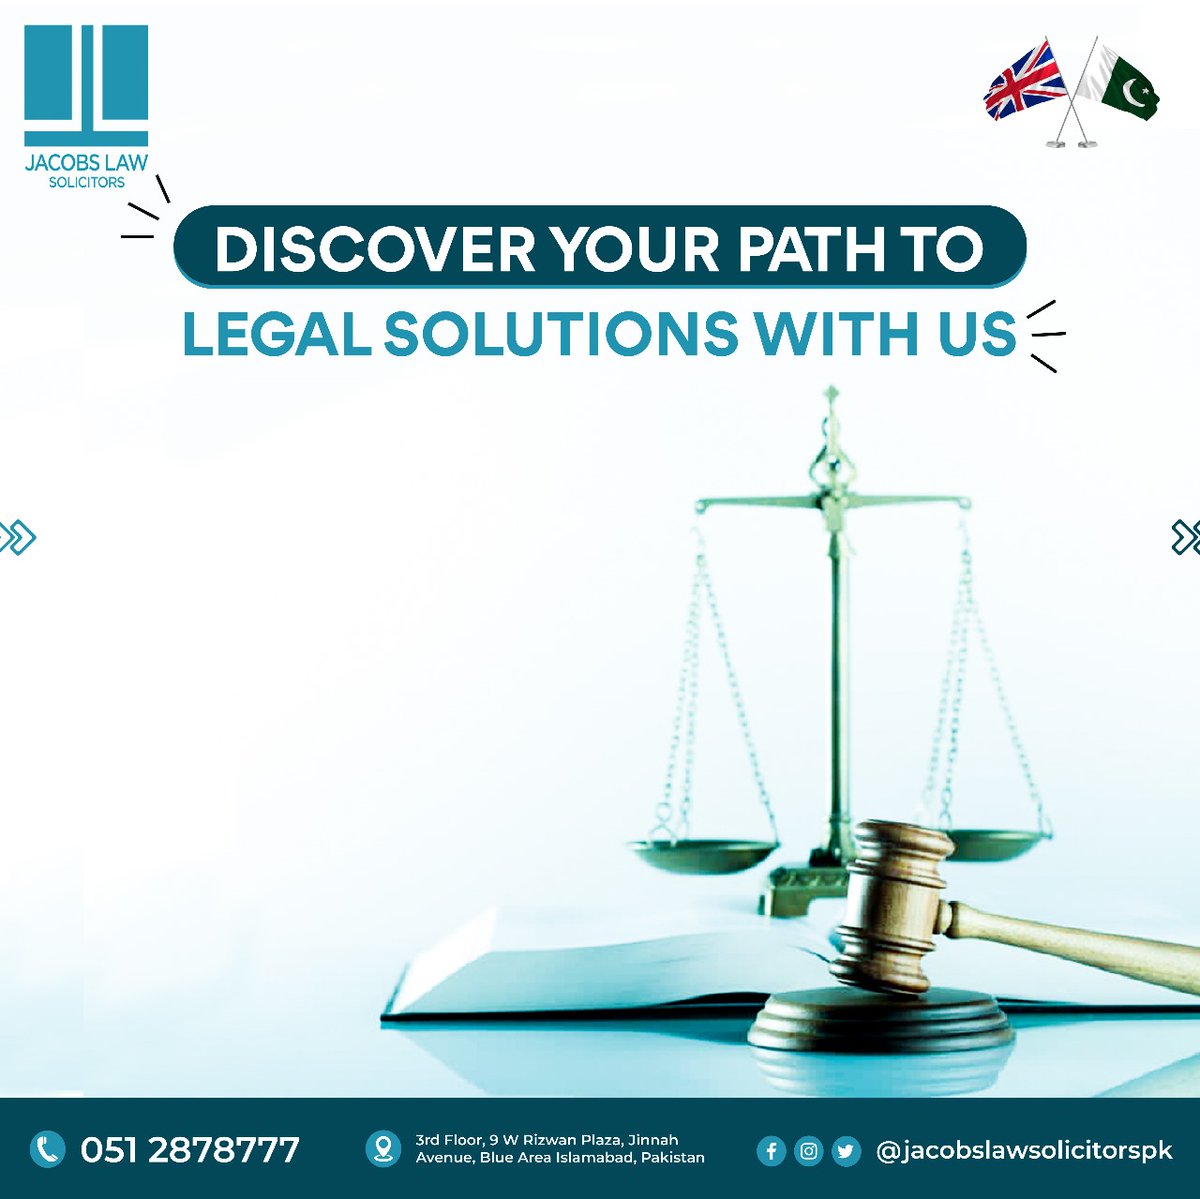 Discover Your Path To Legal Solutions With Us...!
𝐖𝐡𝐚𝐭𝐬𝐀𝐩𝐩:
+923460573438

#JacobsLawSolicitors #WorkinUK #law #SkilledWorkVisa #immigrationuk #immigrationconsultant #ukvisaapplication #islamabad #ukvisaconsultant #StudyVisaUK #SwitchVisa #WorkVisaUK #SkilledWorkerVisa